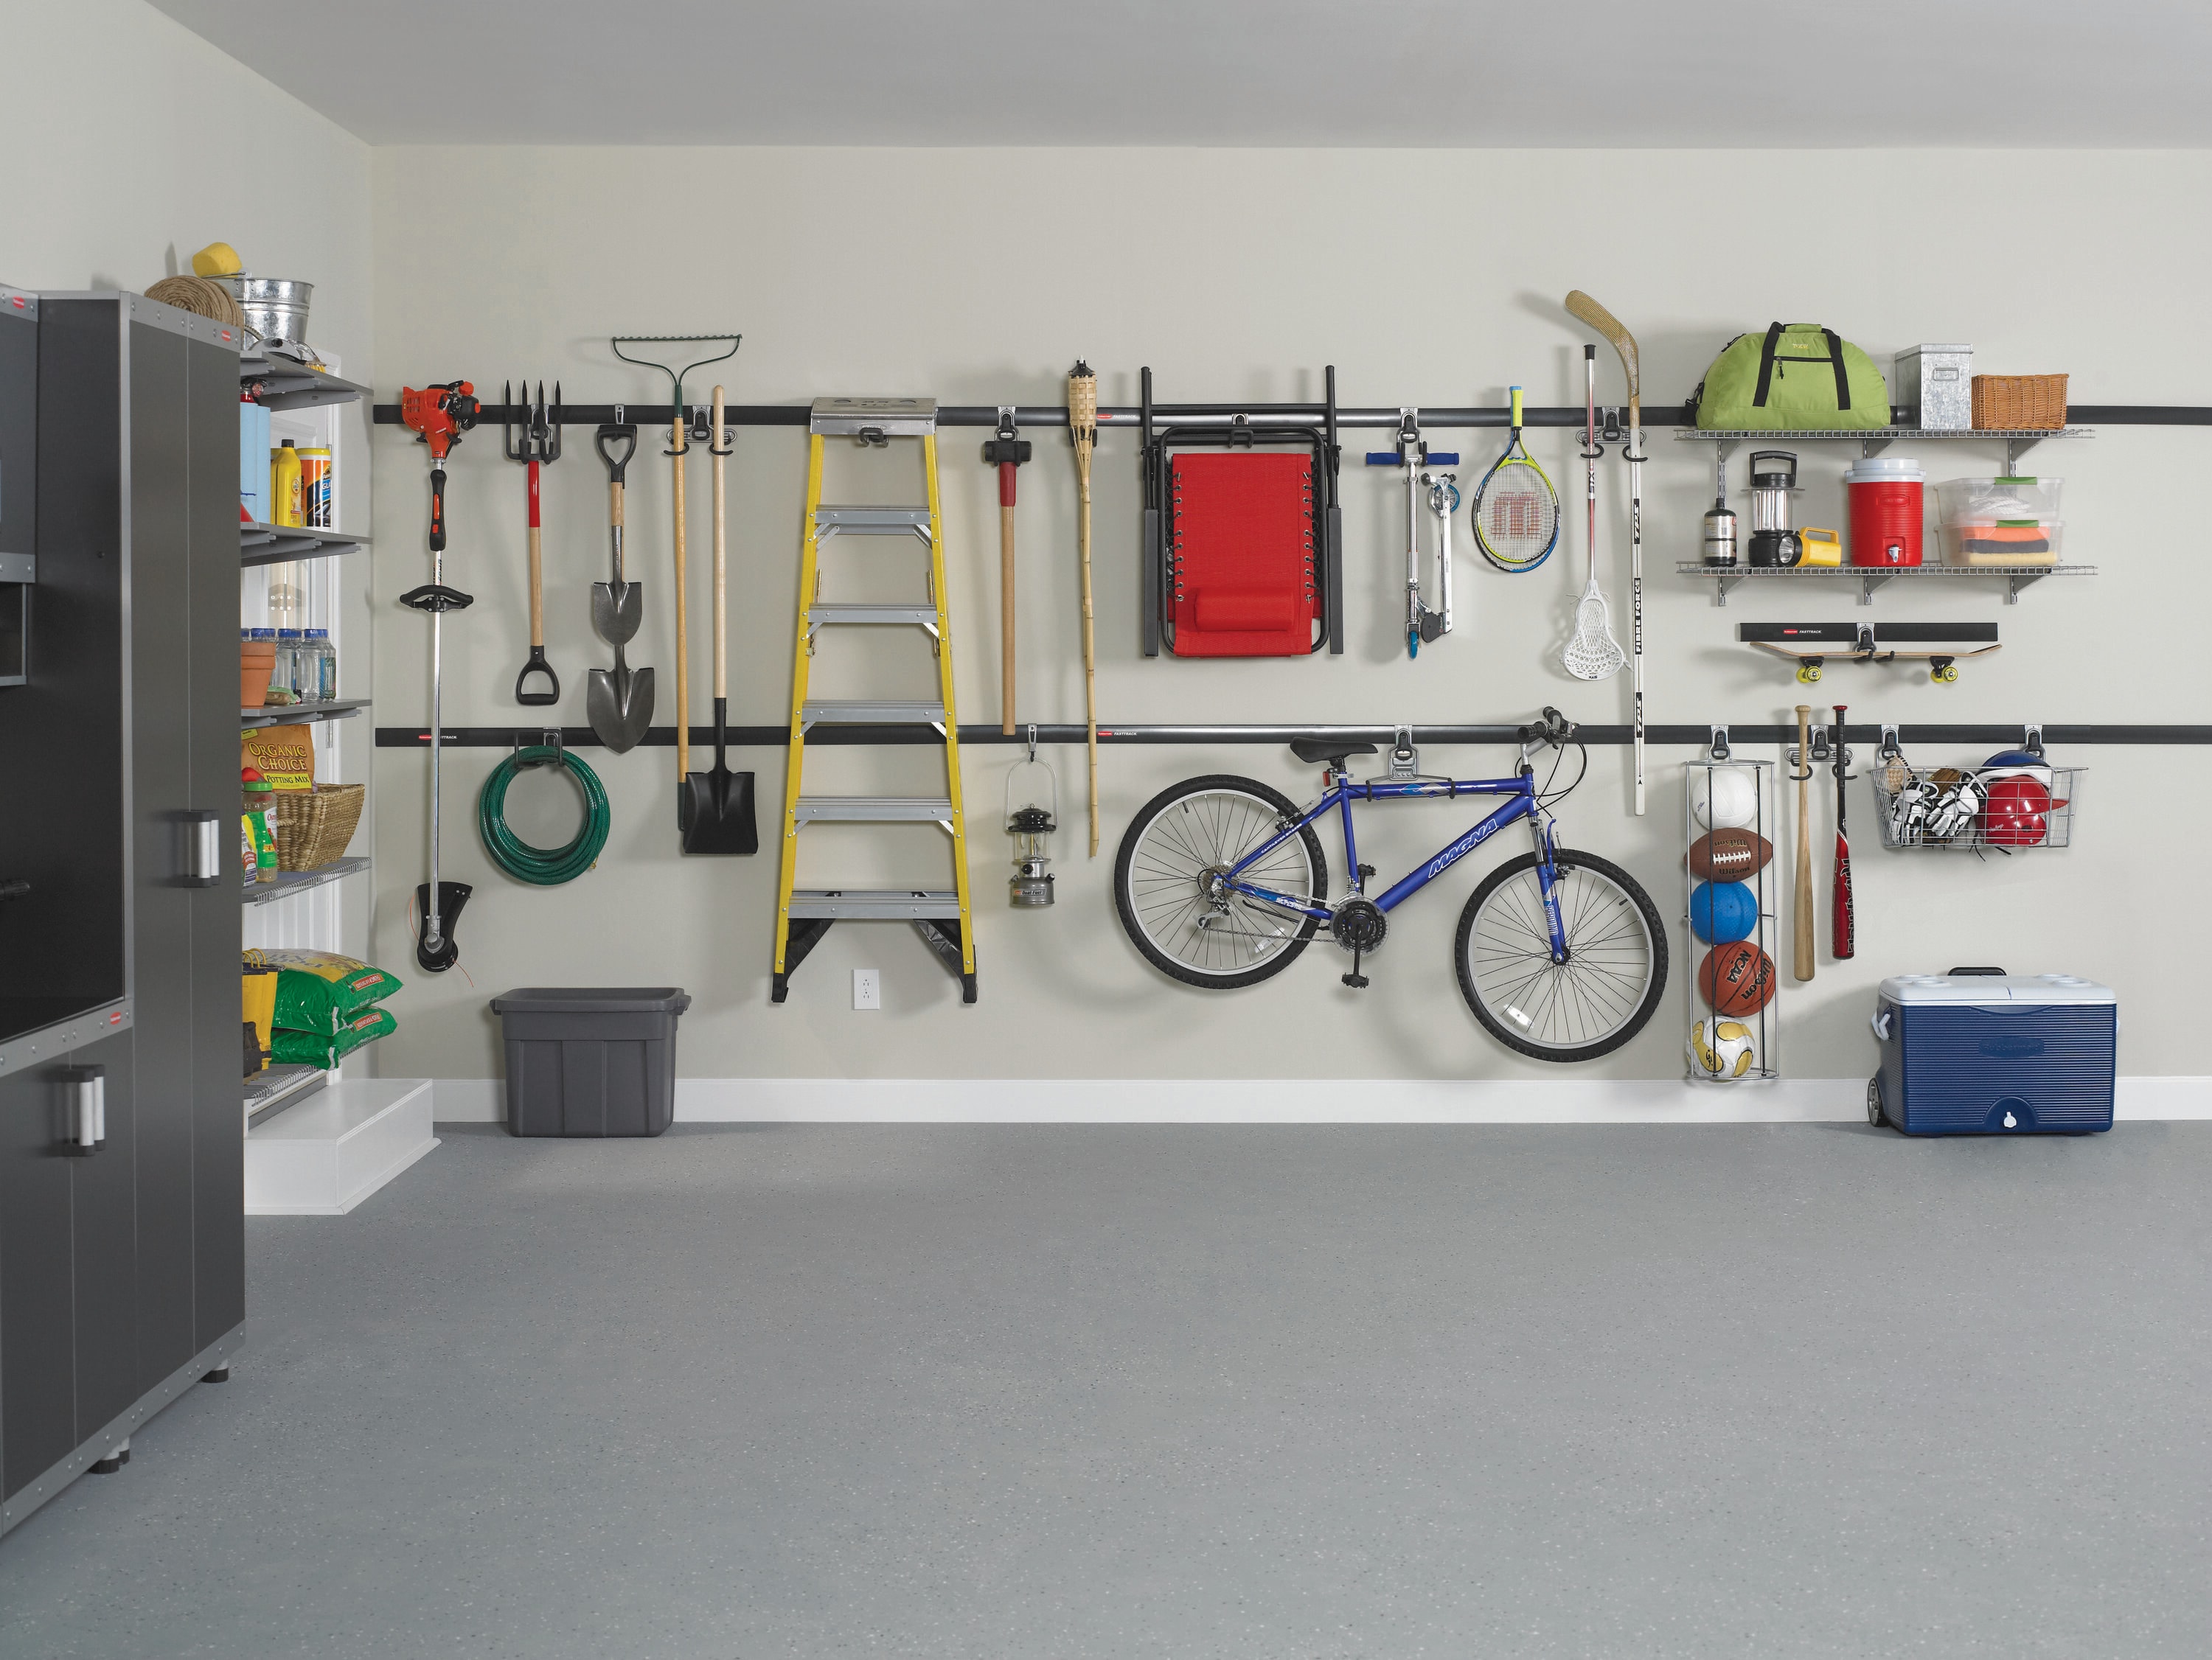 Rubbermaid FastTrack Review - The BEST Garage Storage System